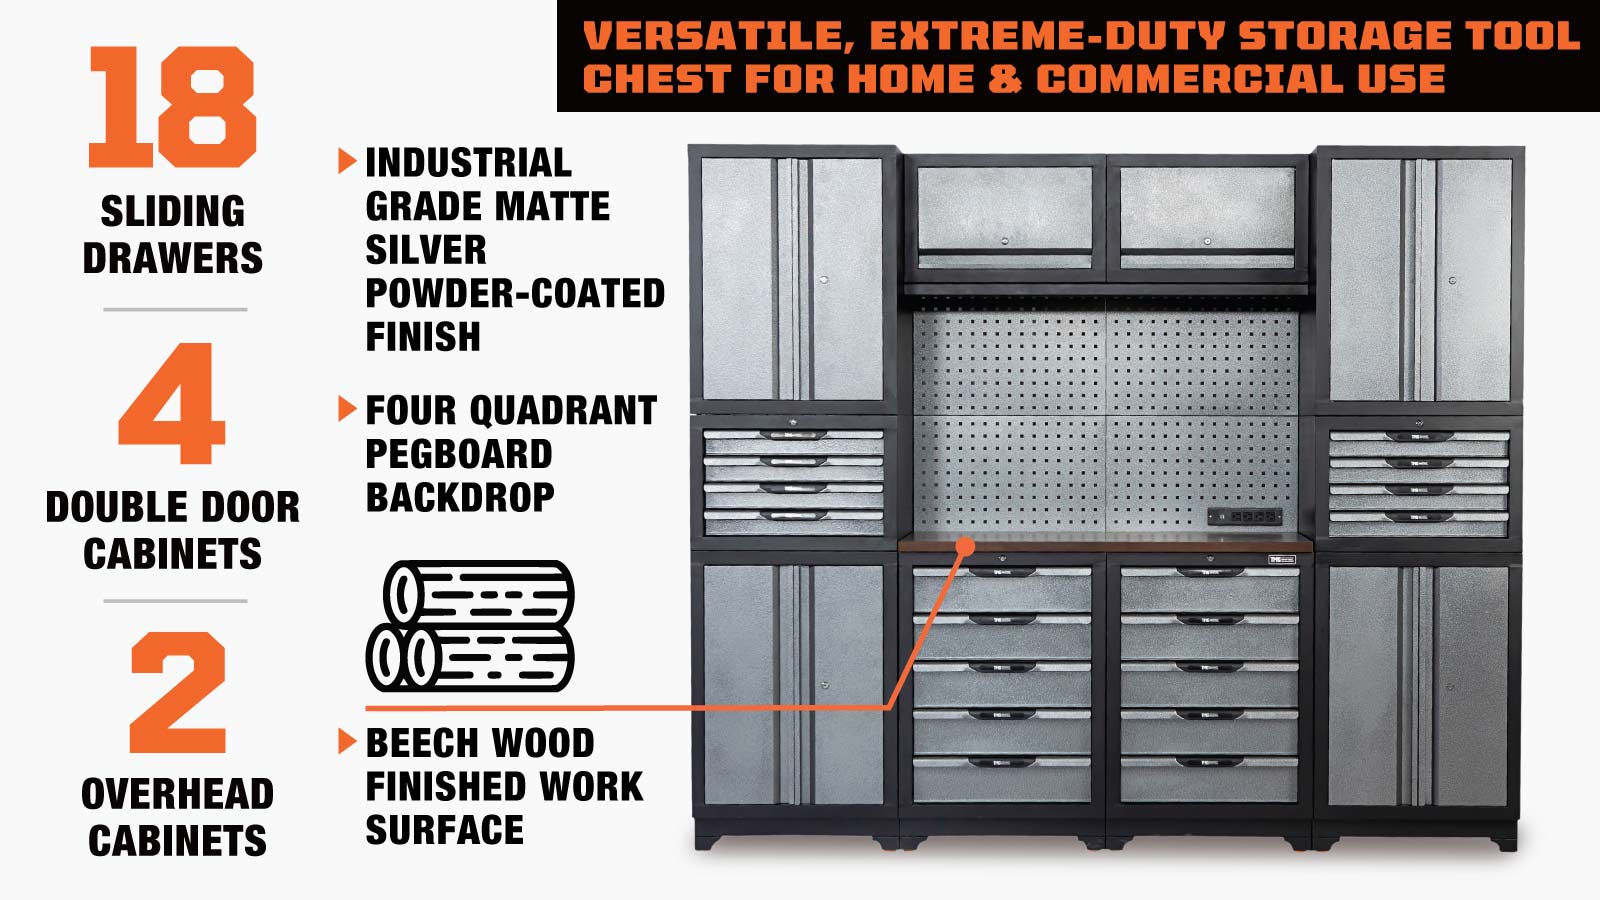 TMG Industrial 8’ Extreme-Duty Steel Garage Tool Chest w/Pegboard, 18 Drawers and Multi Cabinets, TMG-WBM08-description-image